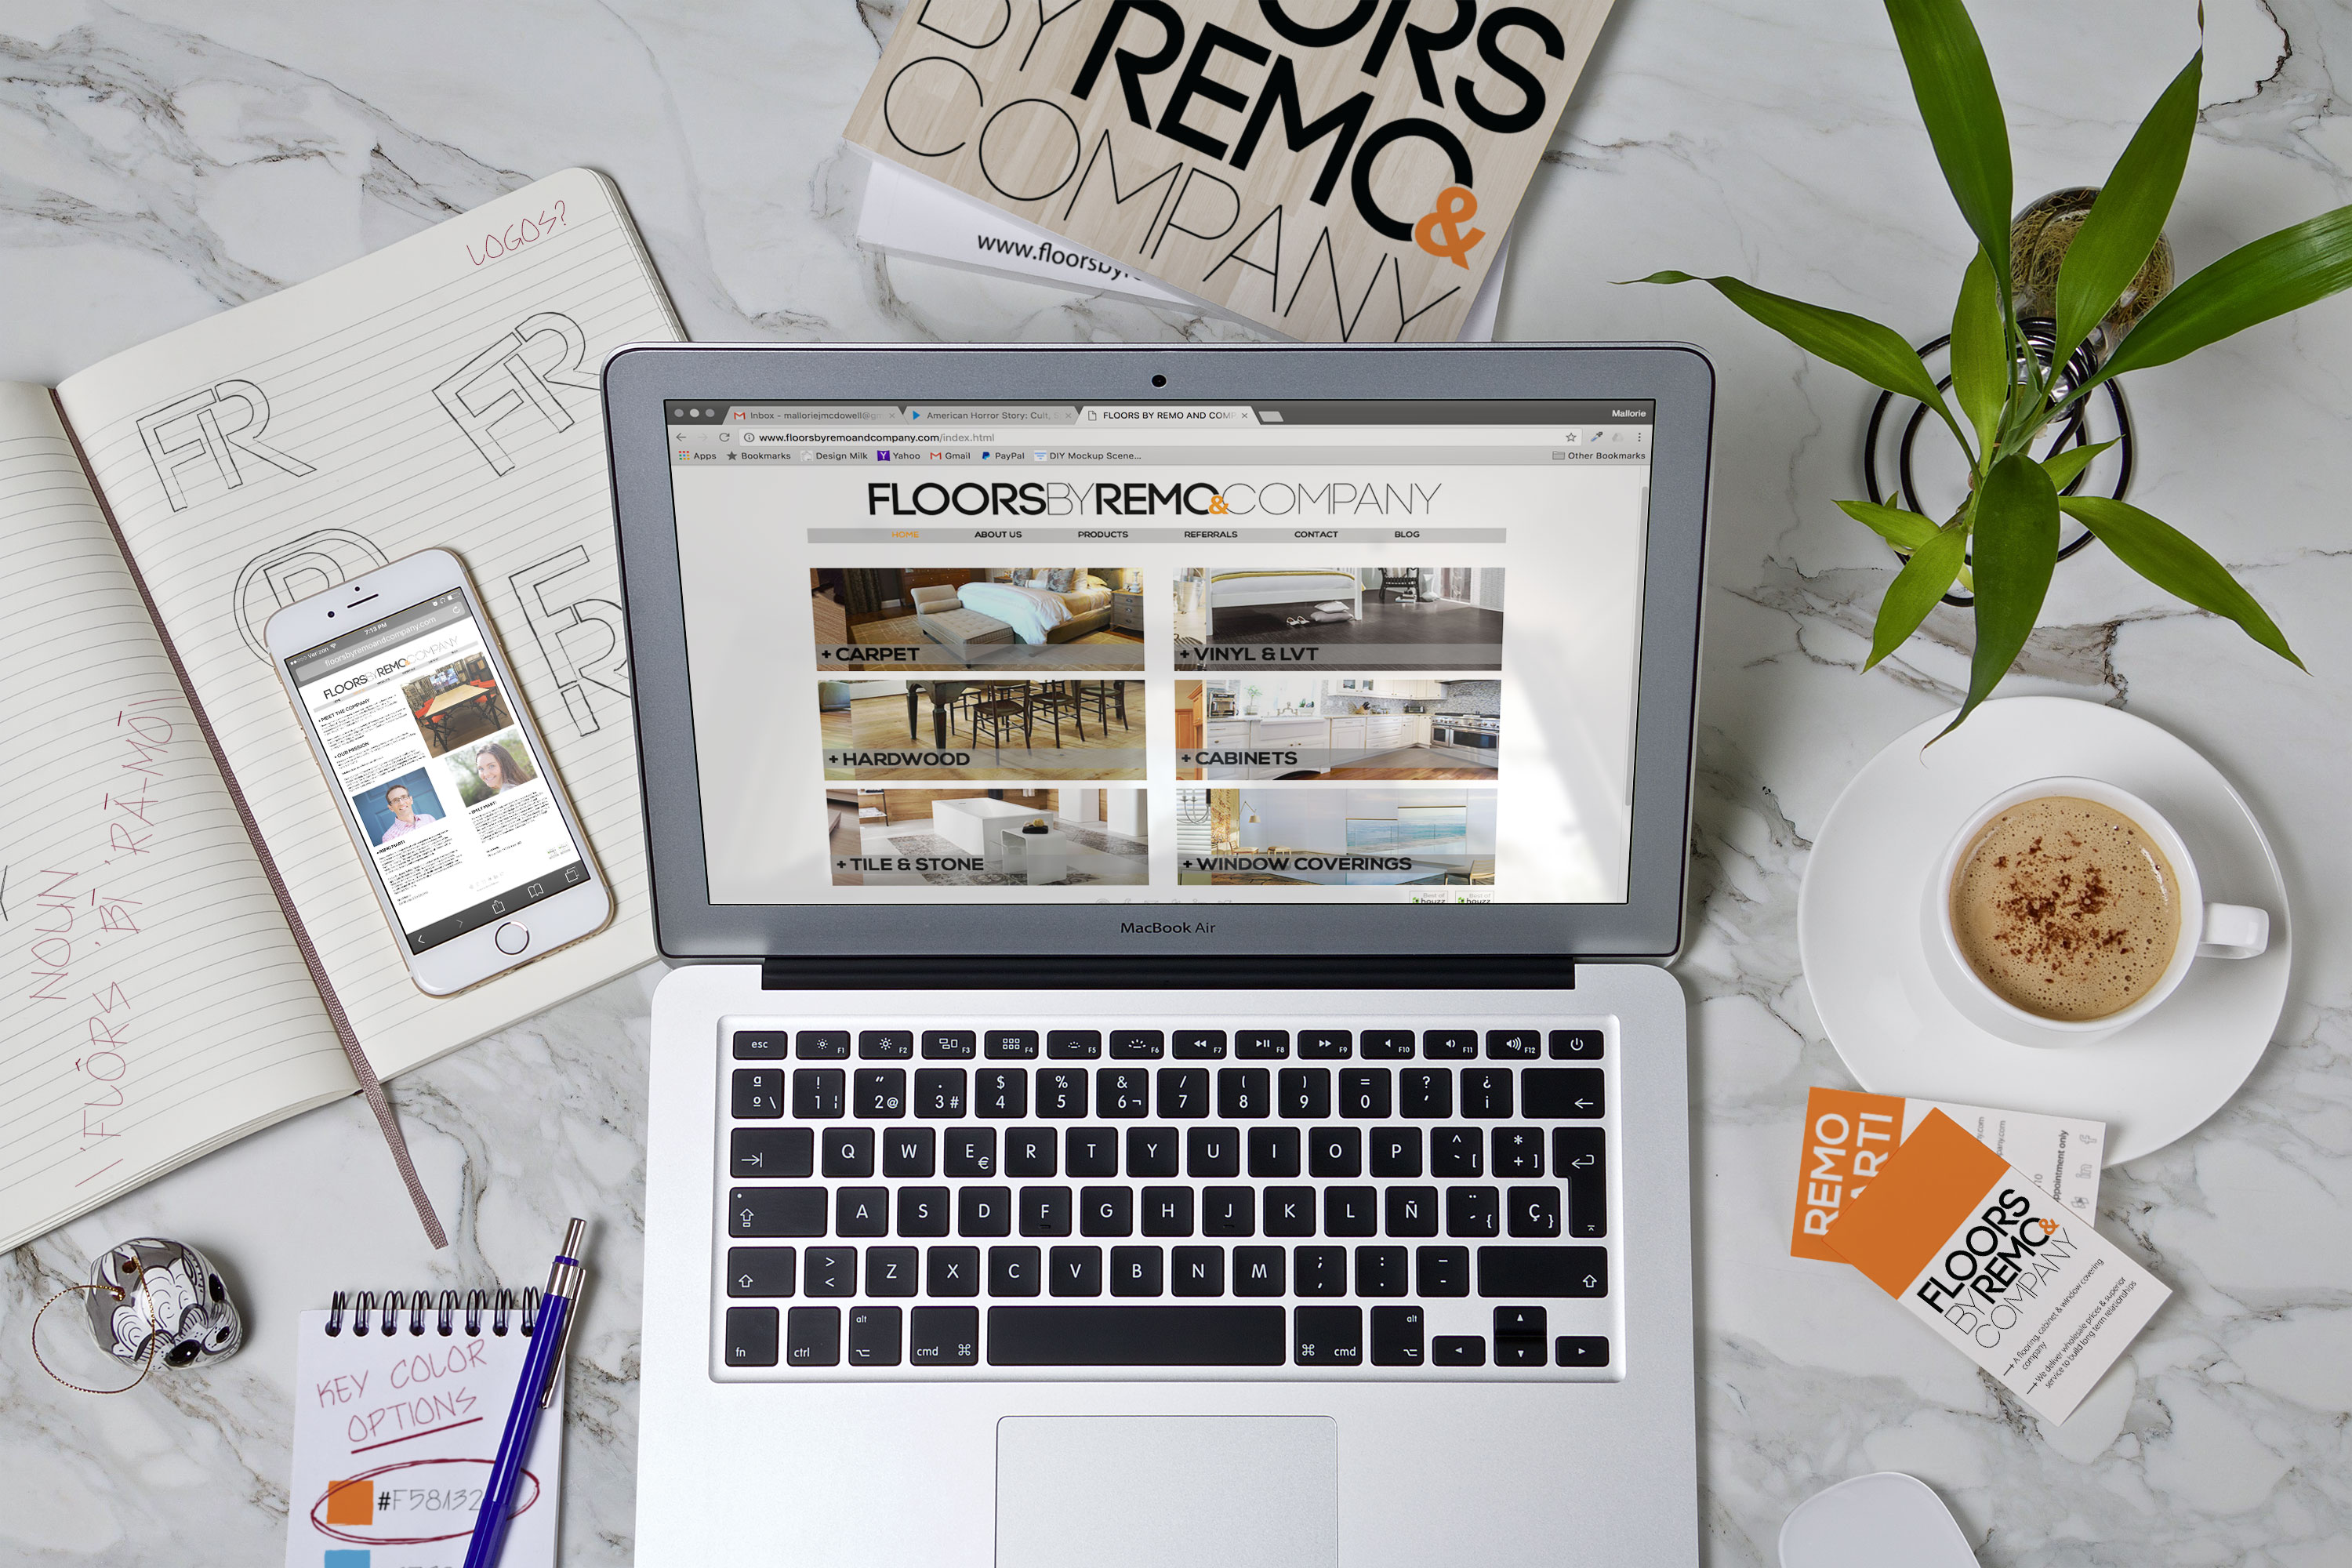 Floors By Remo & Company Website Mockup